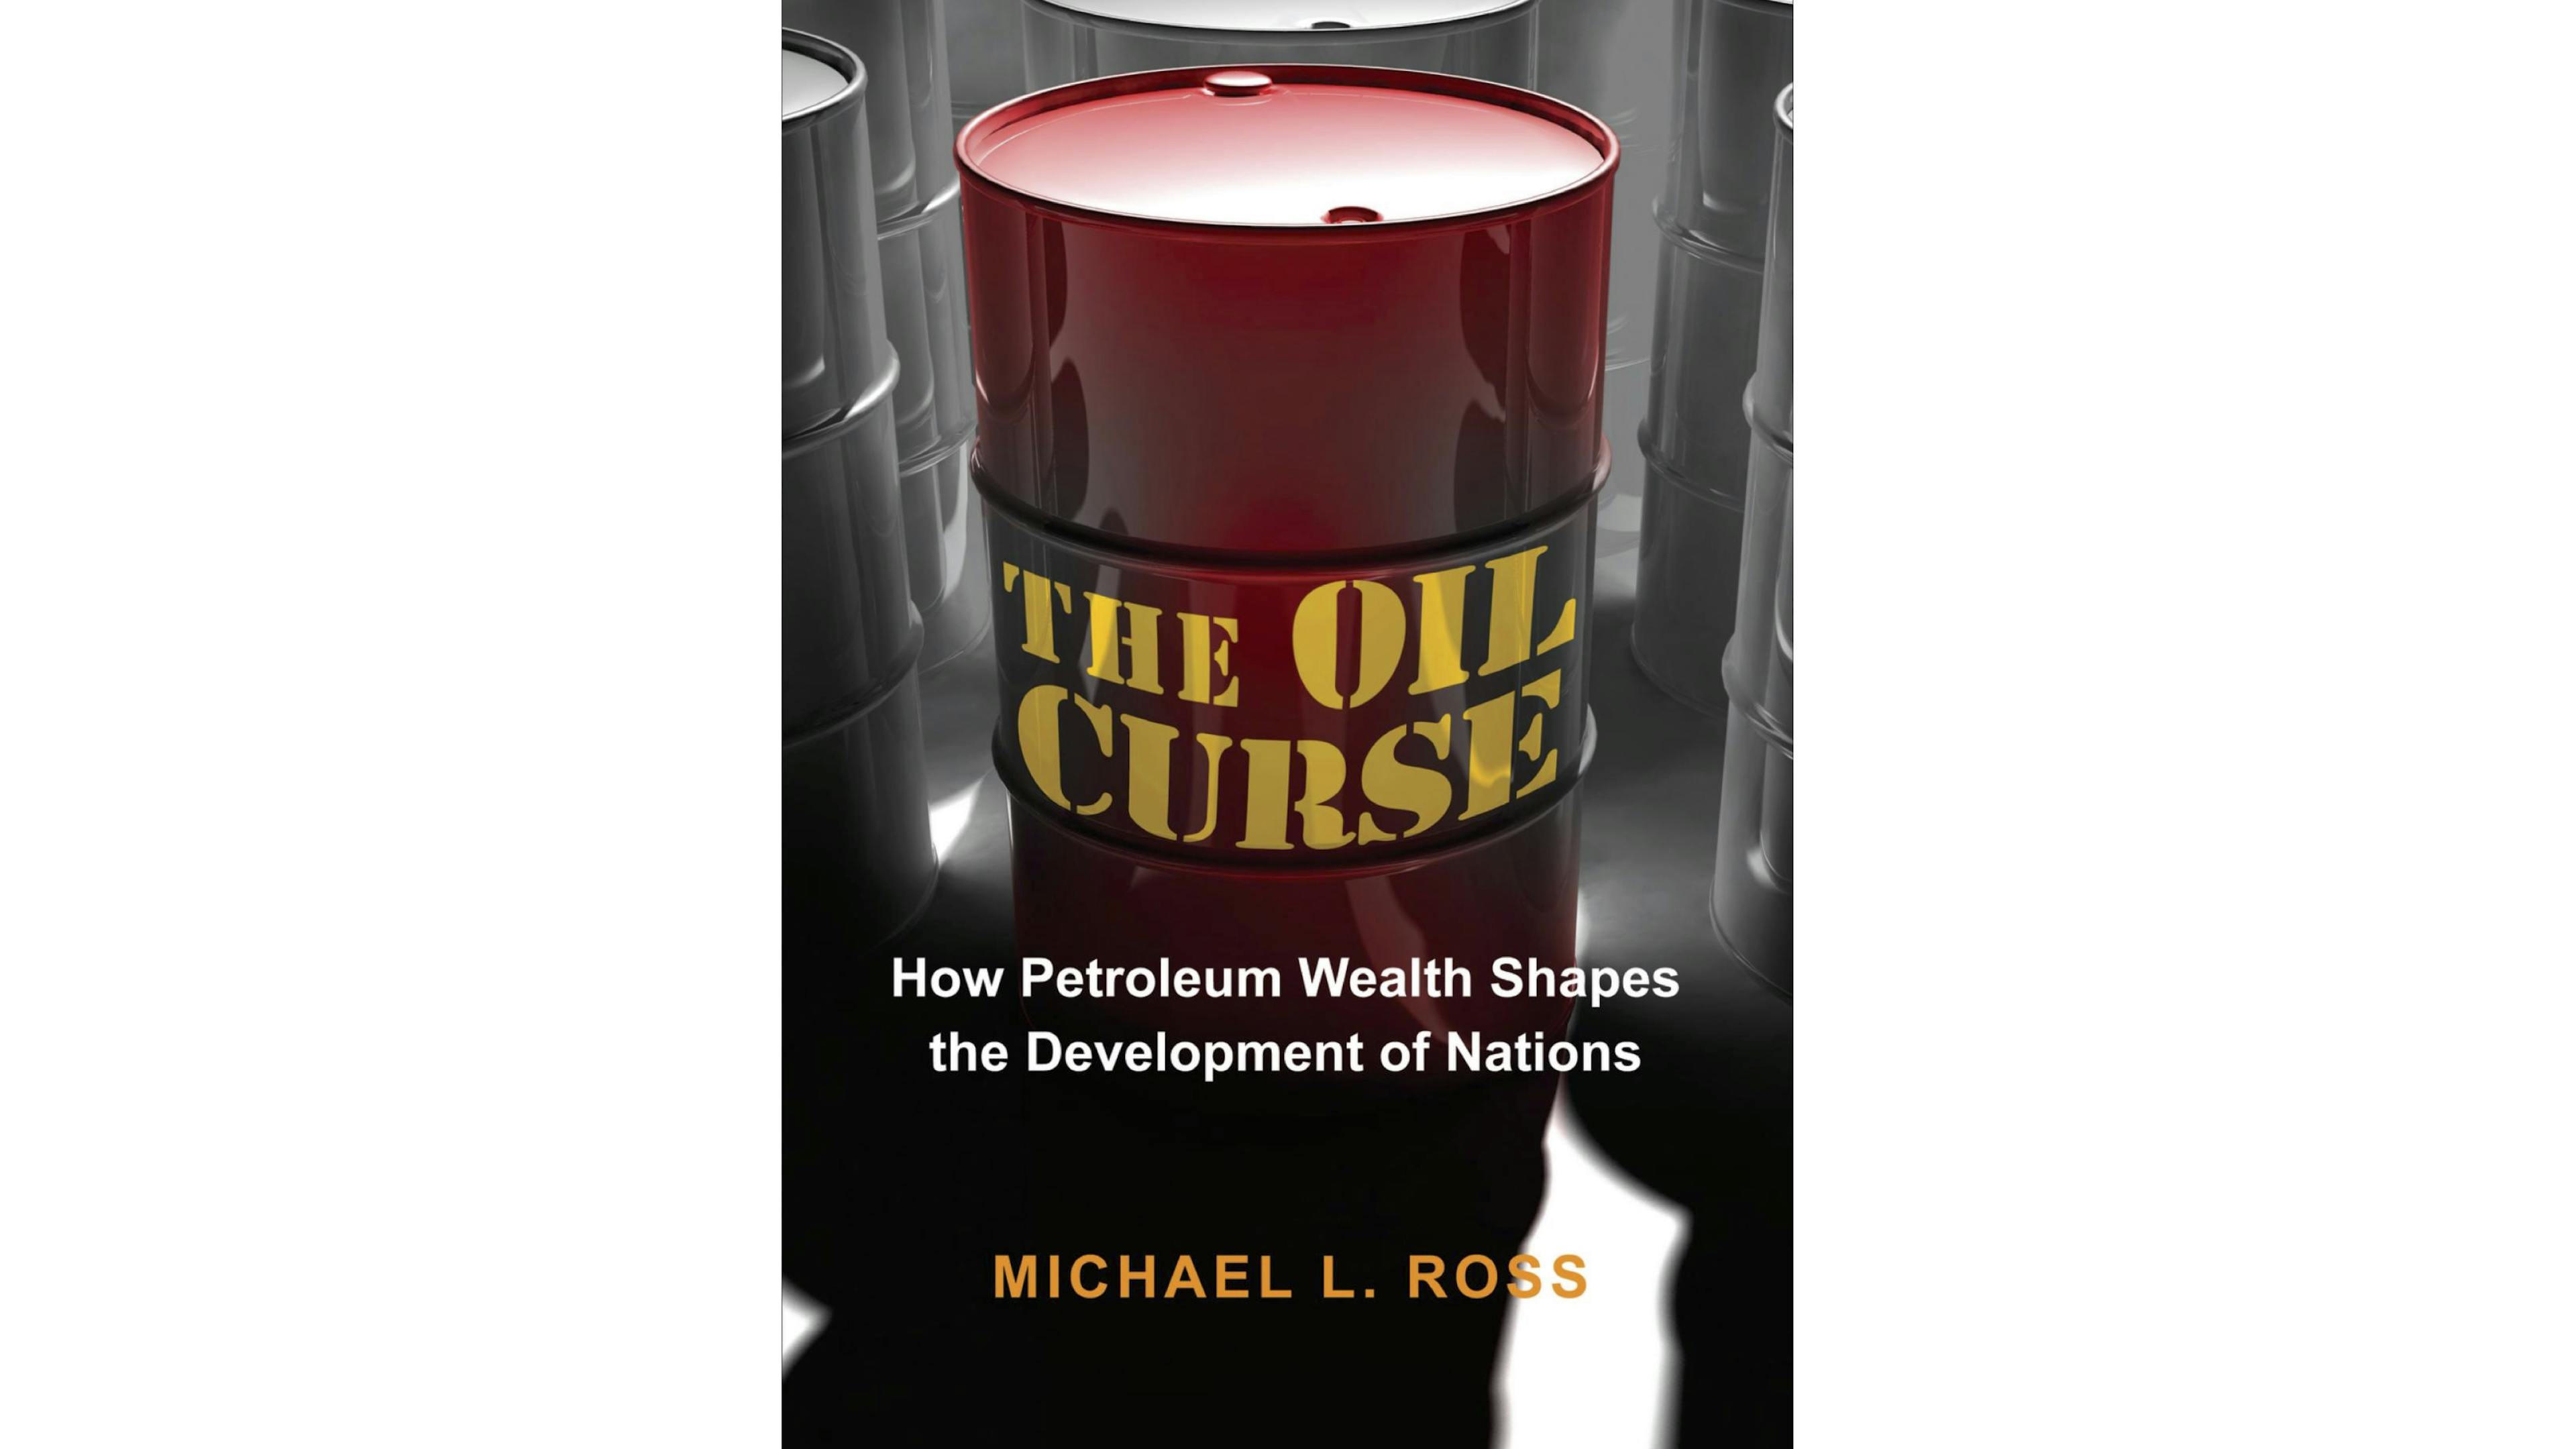 The Oil Curse: How Petroleum Wealth Shapes the Development of Nations by Michael L. Ross